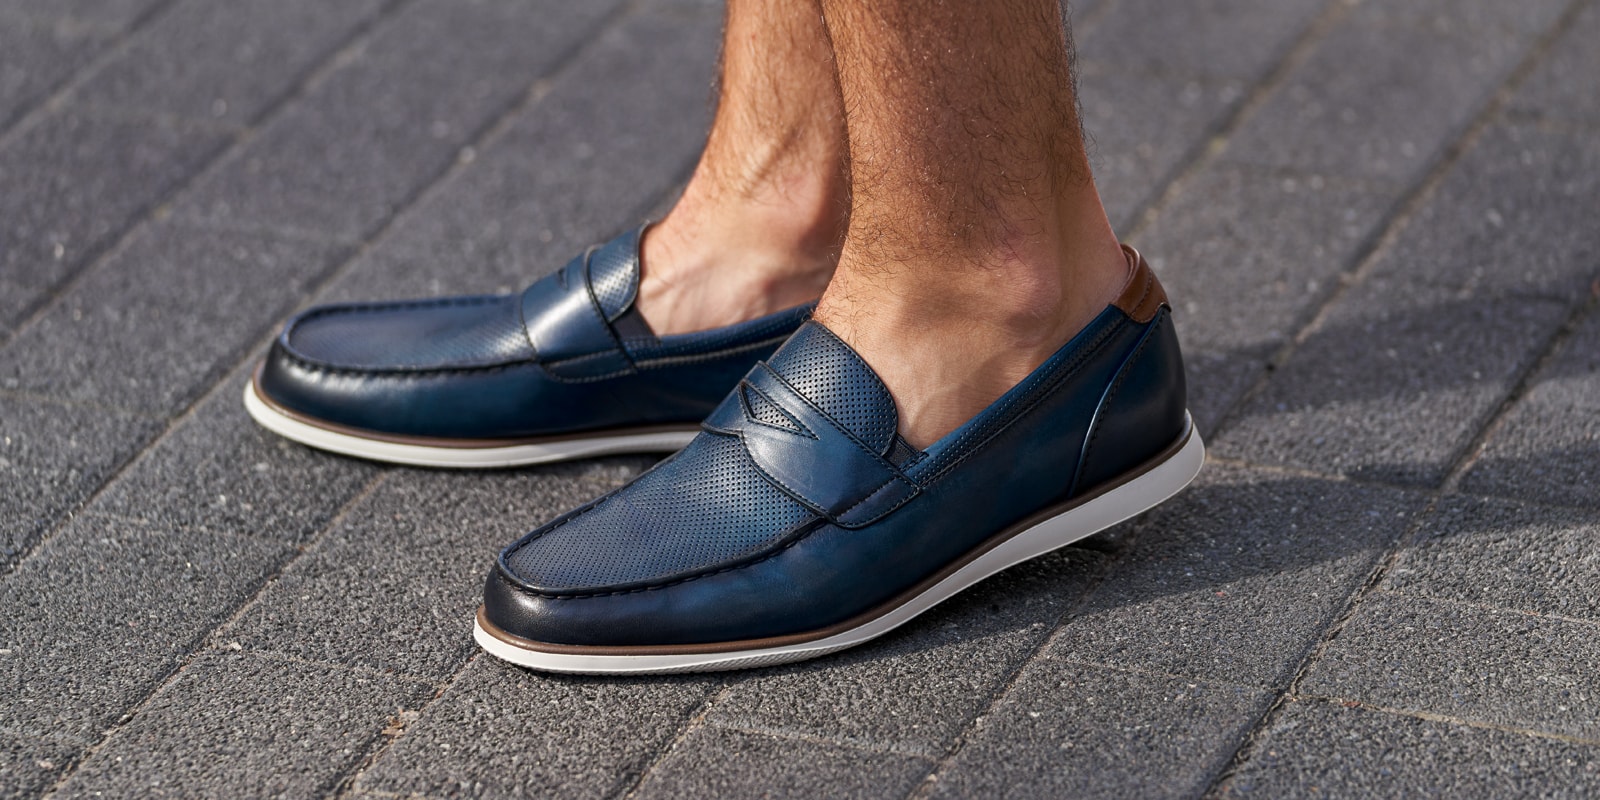 The featured image is the Atlantic Moc Toe Penny Loafer in Navy.